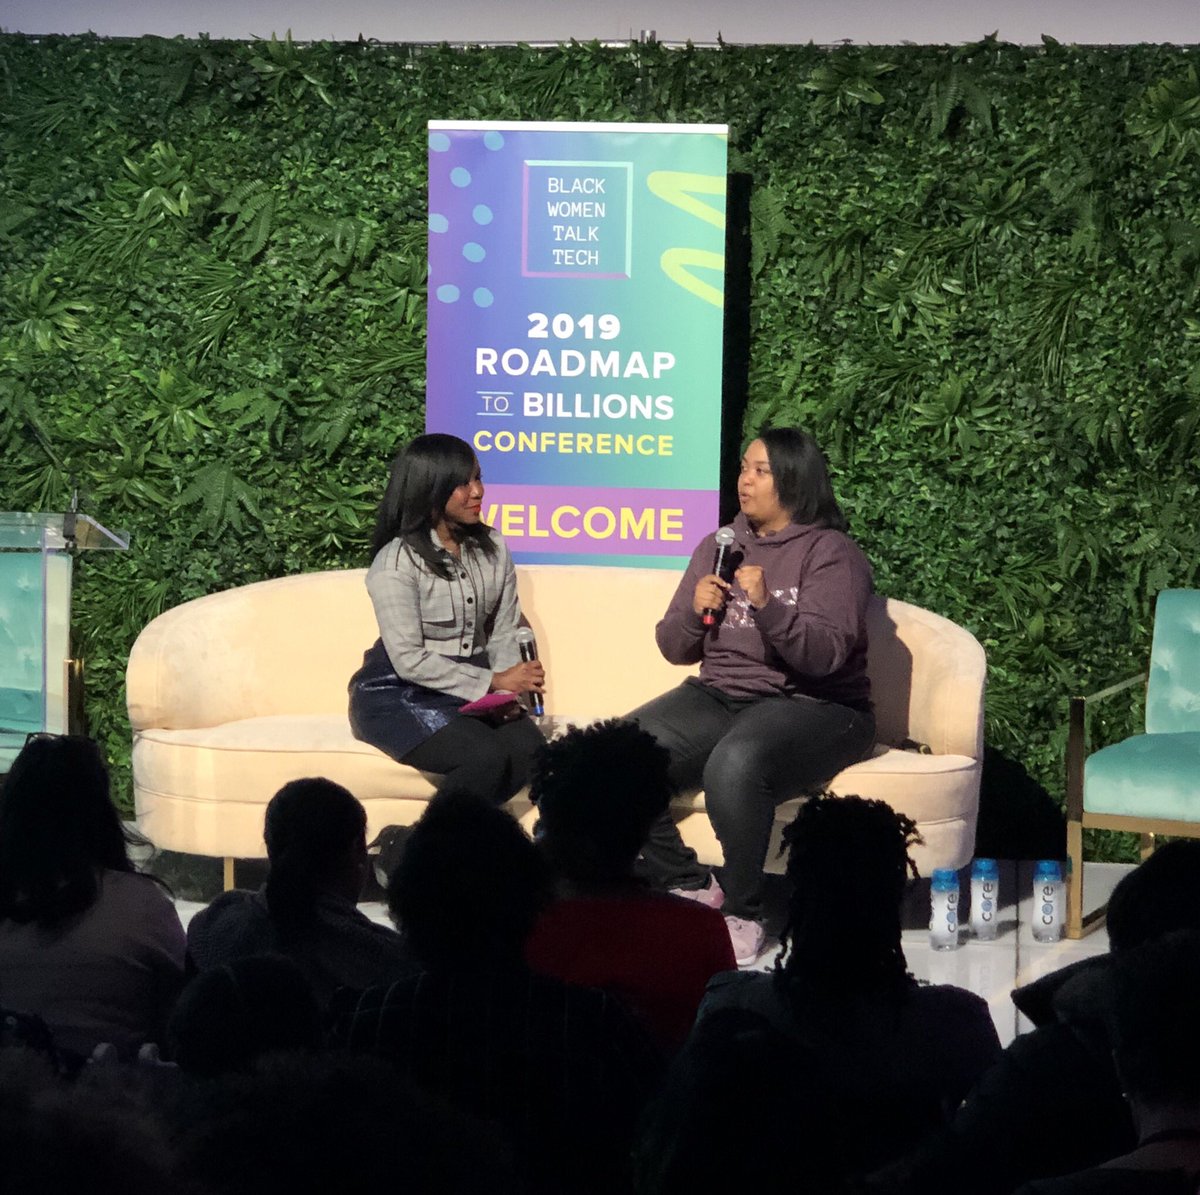 Fireside Chat with @ArlanWasHere here at @BWTalkTech ‘s #RoadmapToBillions Conference. “You don’t get anywhere great by taking a mediocre path” #facts #StriveForGreatness #NEXTdiversefounders #diversefounders @diversefounders #BWTTRTB2019 #BWTTCon2019